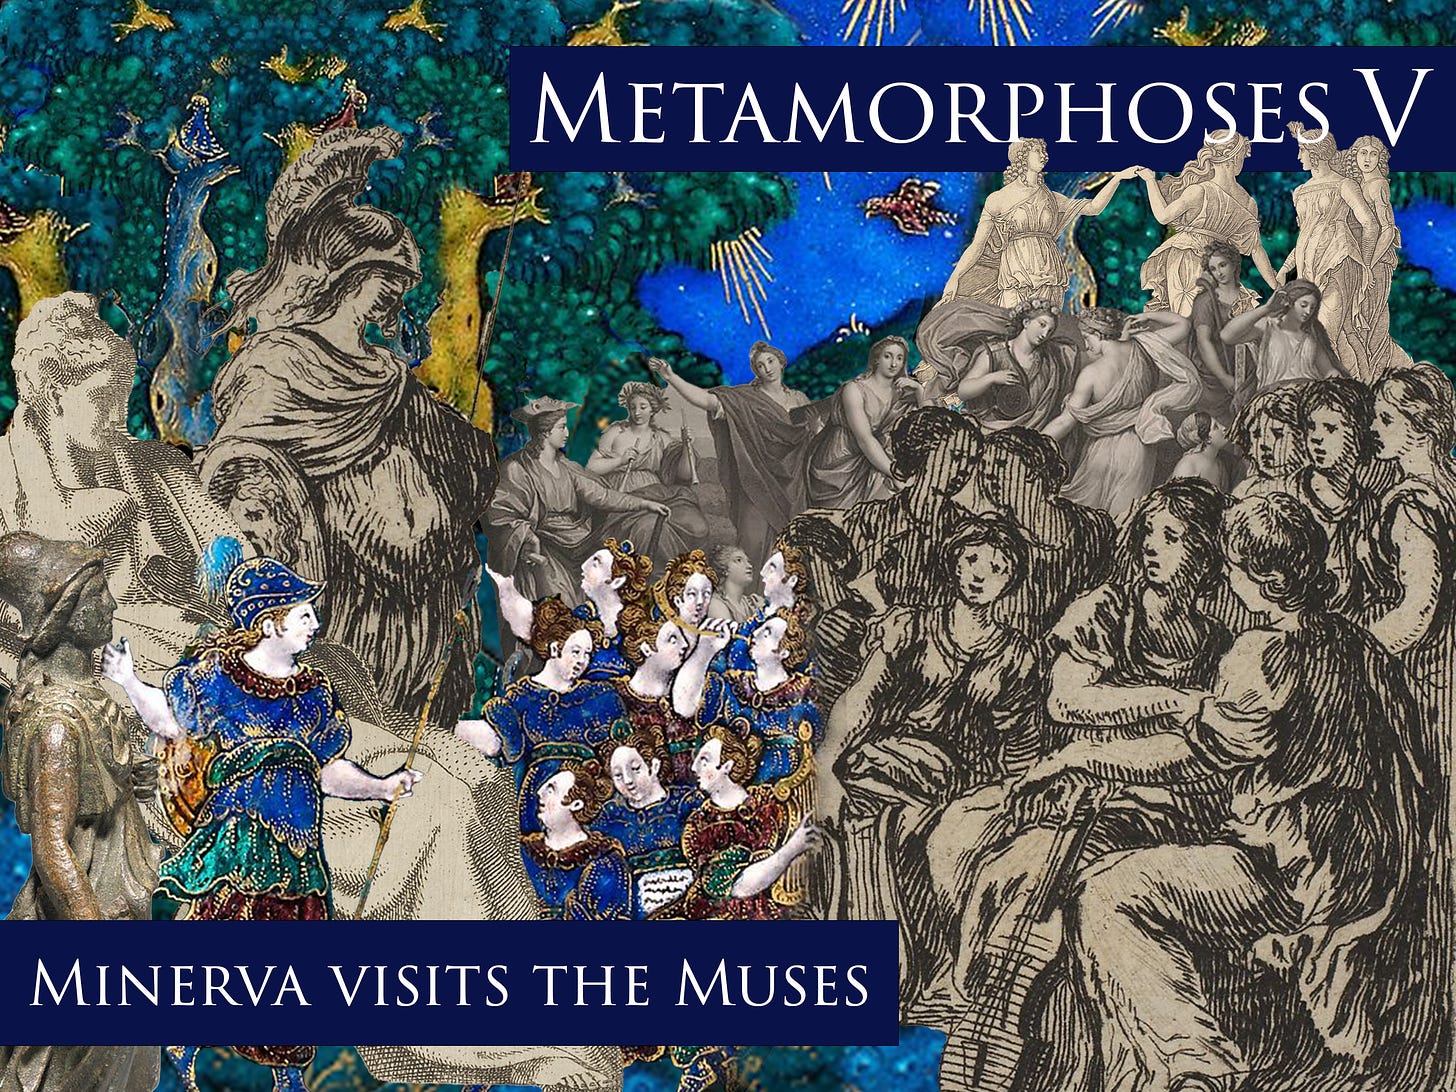 A photo collage. On the left are 4 images of the  goddess Minerva (1 is a bronze statue, 1 is colored enamel, 2 are black and white etchings). On the right are 4 images of the Muses (Greek Goddesses) (1 is colored enamel, 3 are black and white etchings.)  The background is made colored enamel trees, a colored enamel sky with gold beams of light, and colored enamel ground. Text in the top right is white on a blue background and reads: "Metamorphoses V". Text in the bottom left is identical in font and color and says: "Minerva visits the Muses"